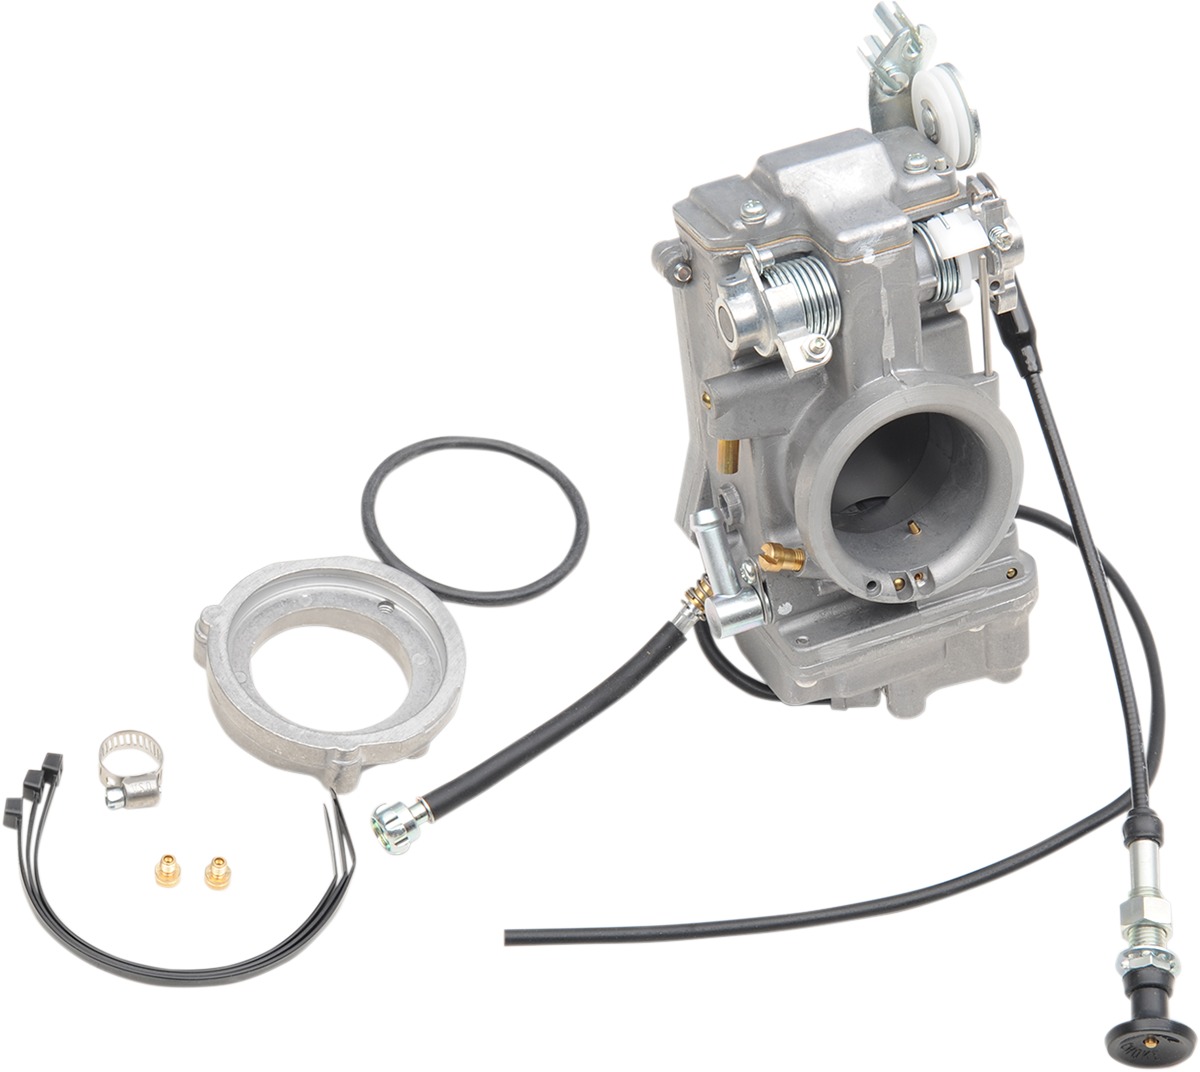 HSR Carburetor Easy Kit 45 mm - For 84-06 Harley Touring Softail Dyna - Click Image to Close